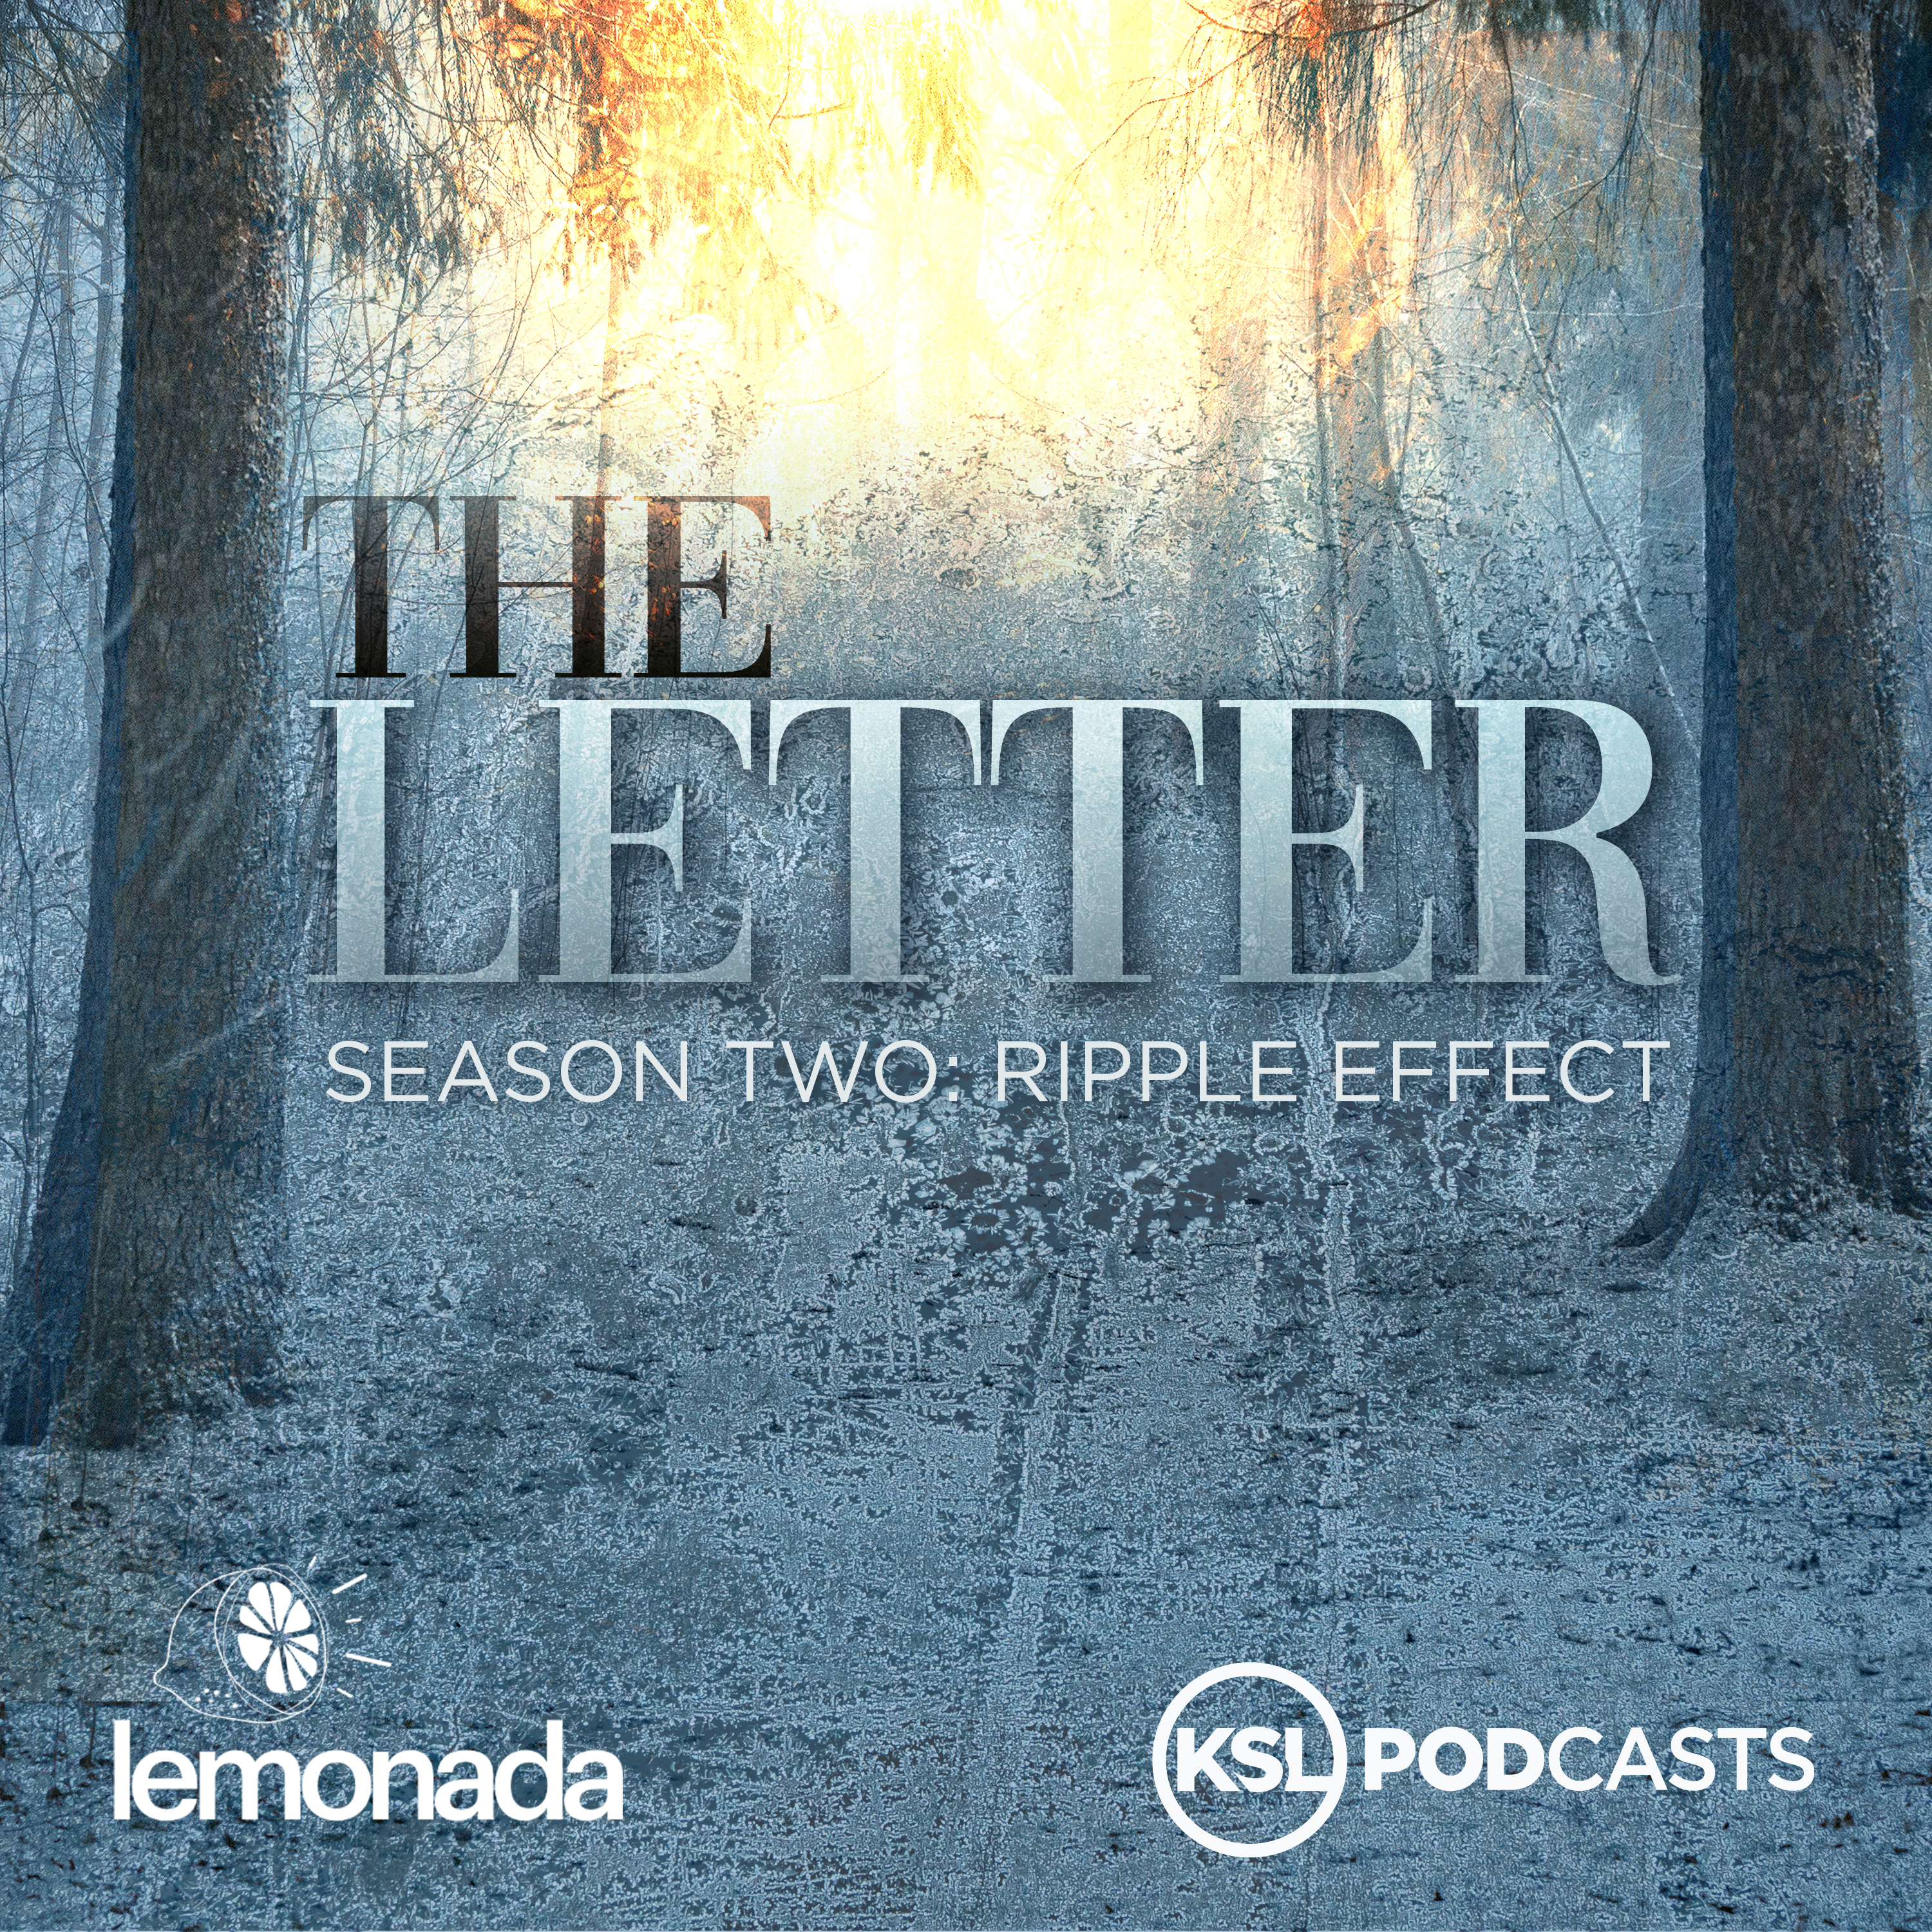 Bonus: How Did The Letter Season 2 Come About?